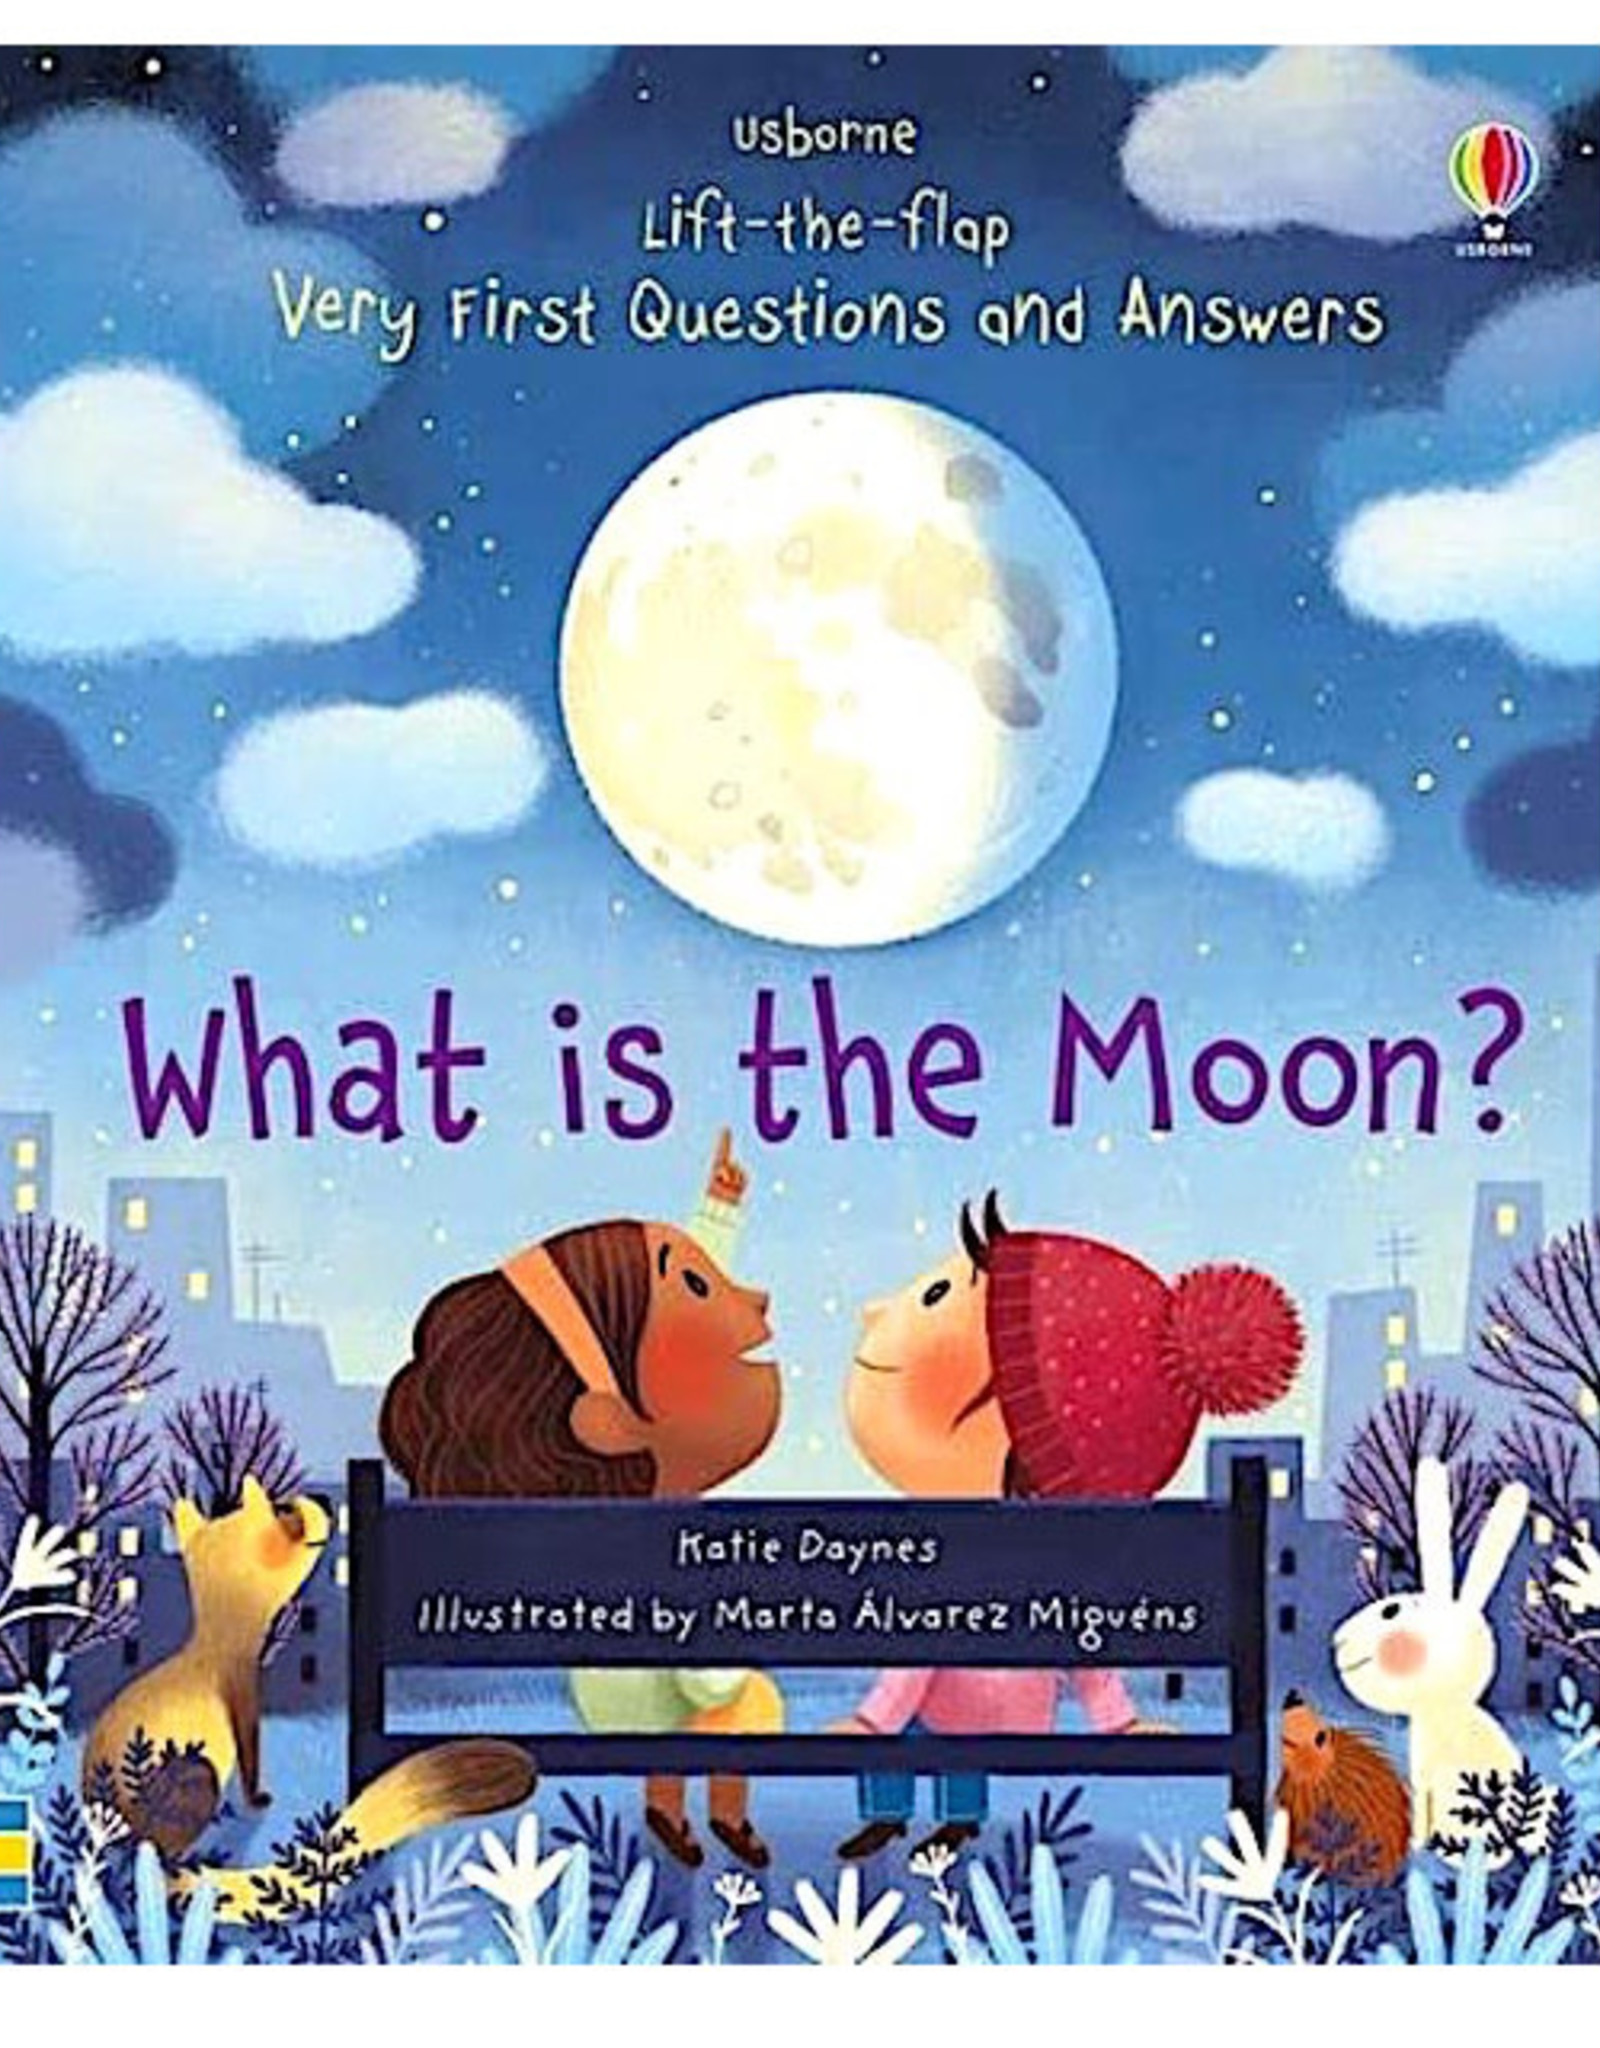 Usborne LTF 1st Q&A What is the Moon?